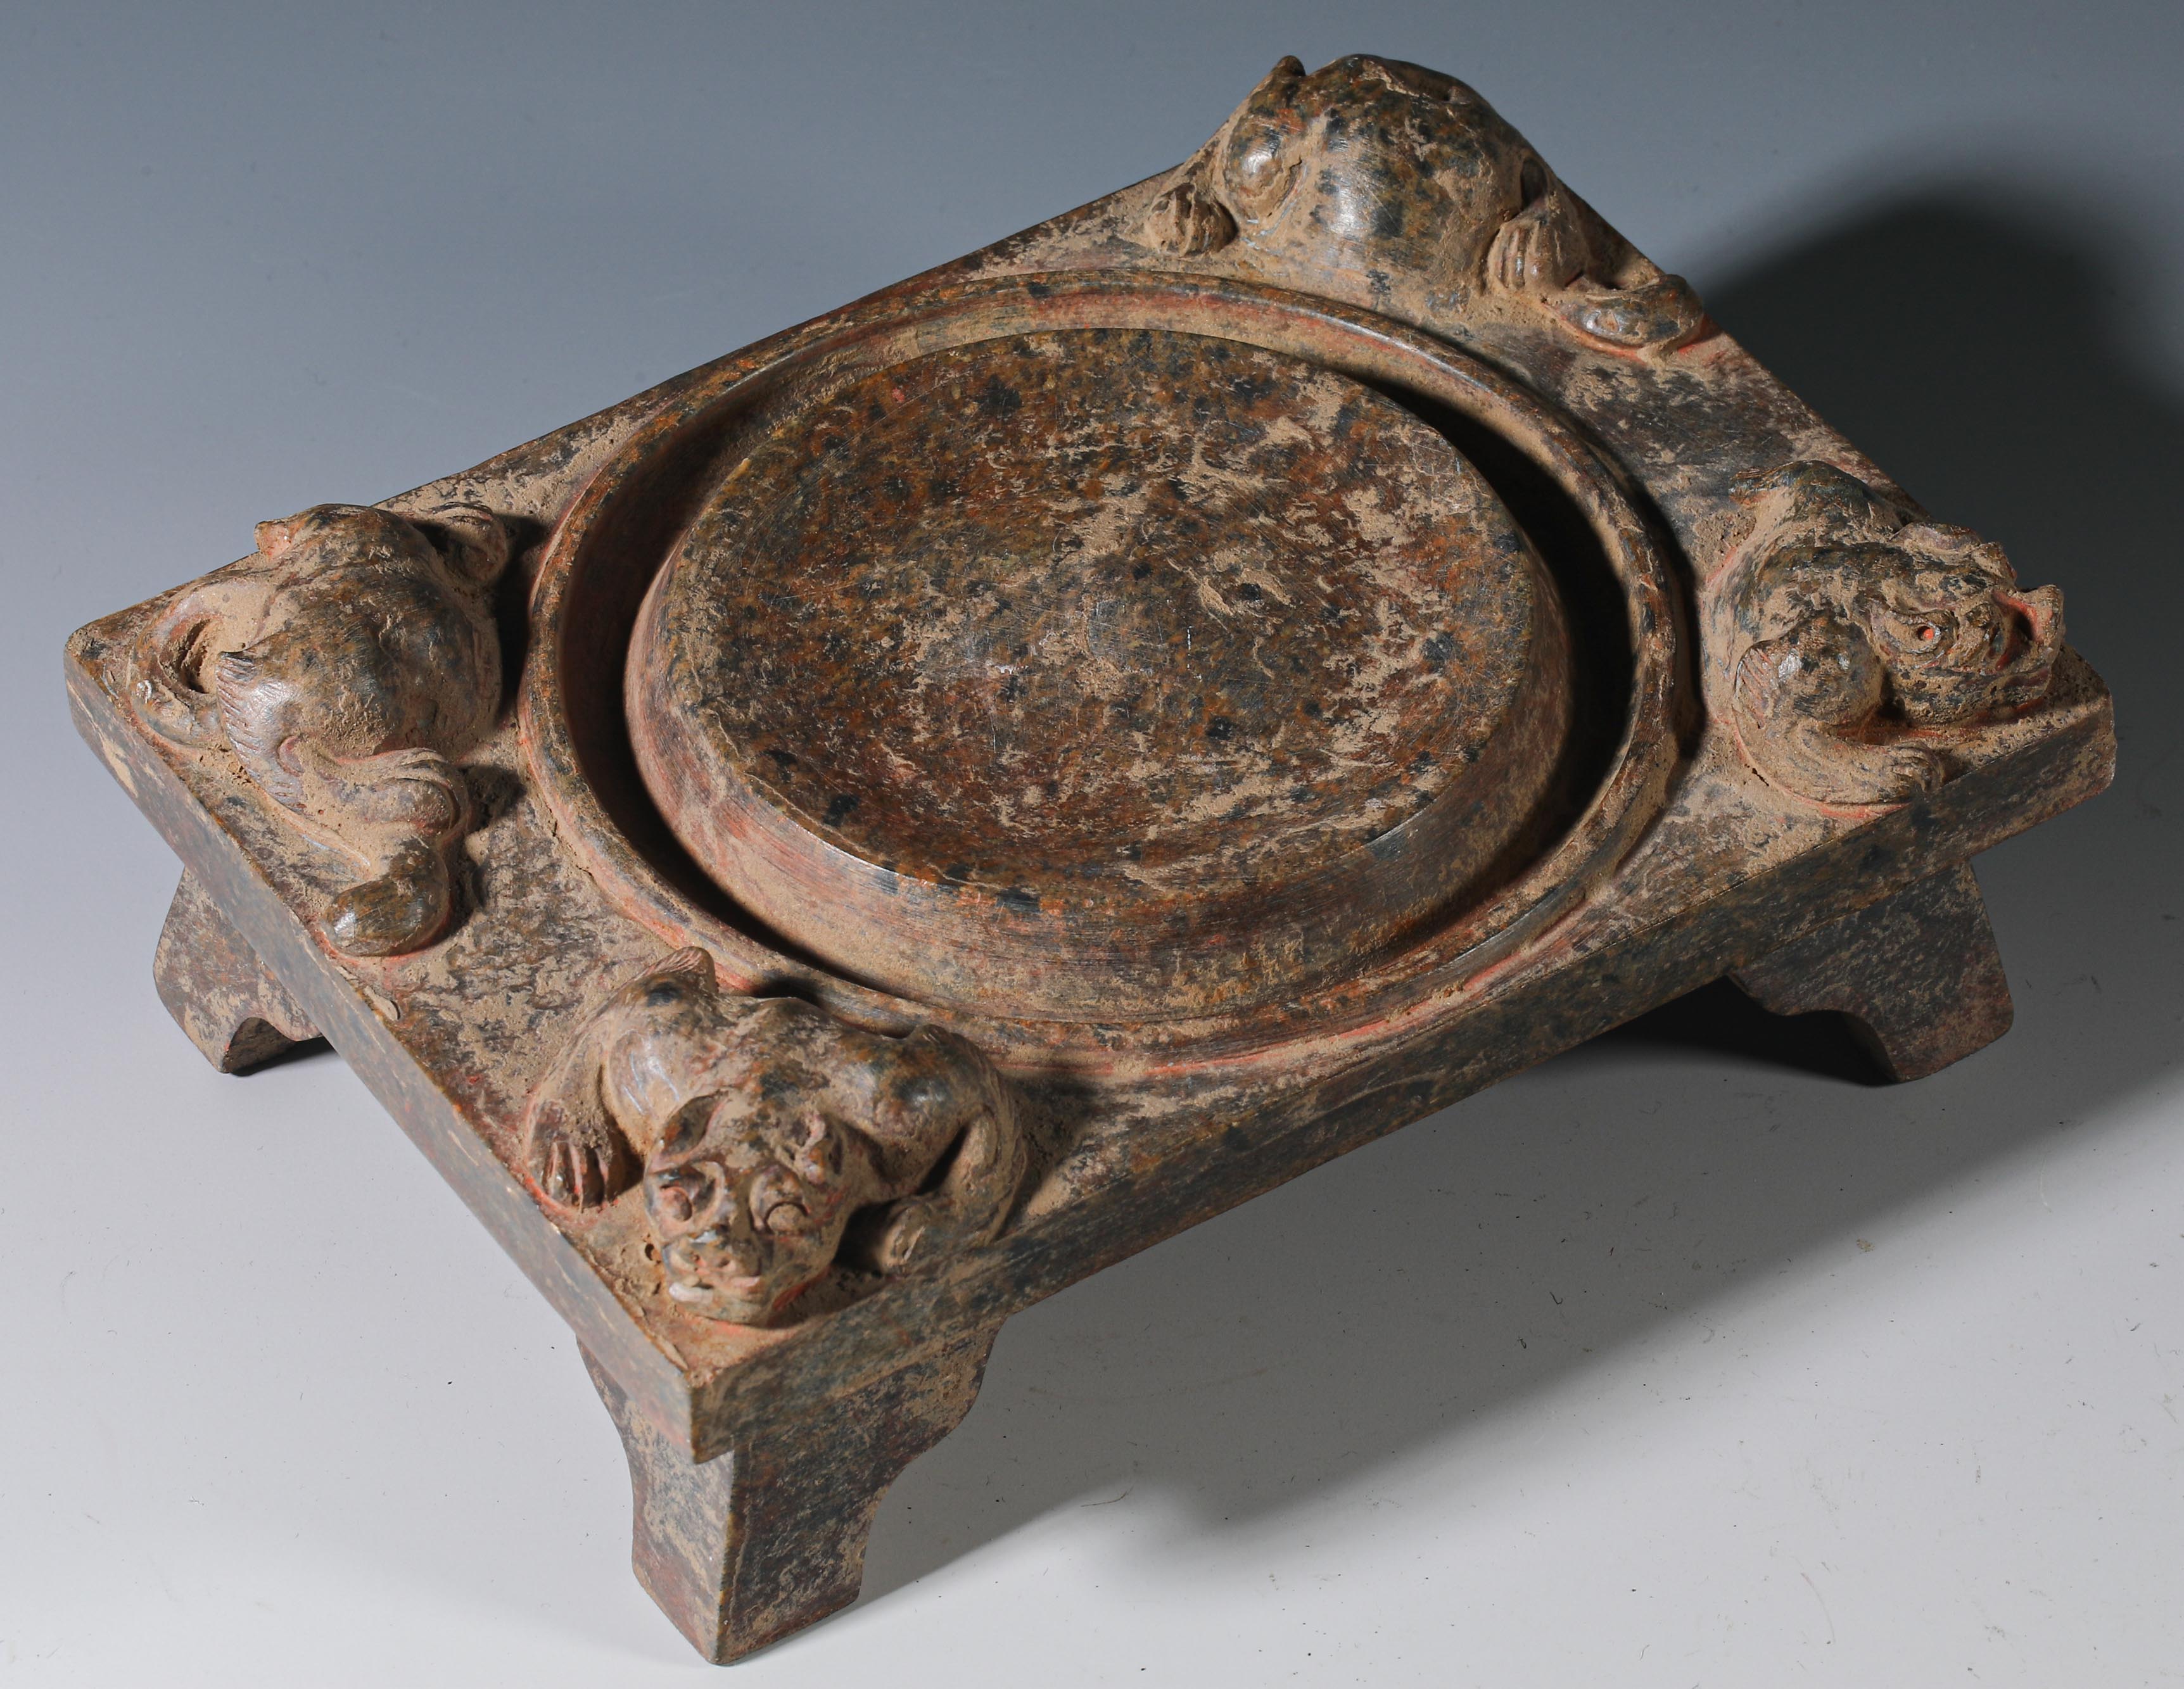 Copper incense burner  from the Han dynasty  - Image 7 of 11